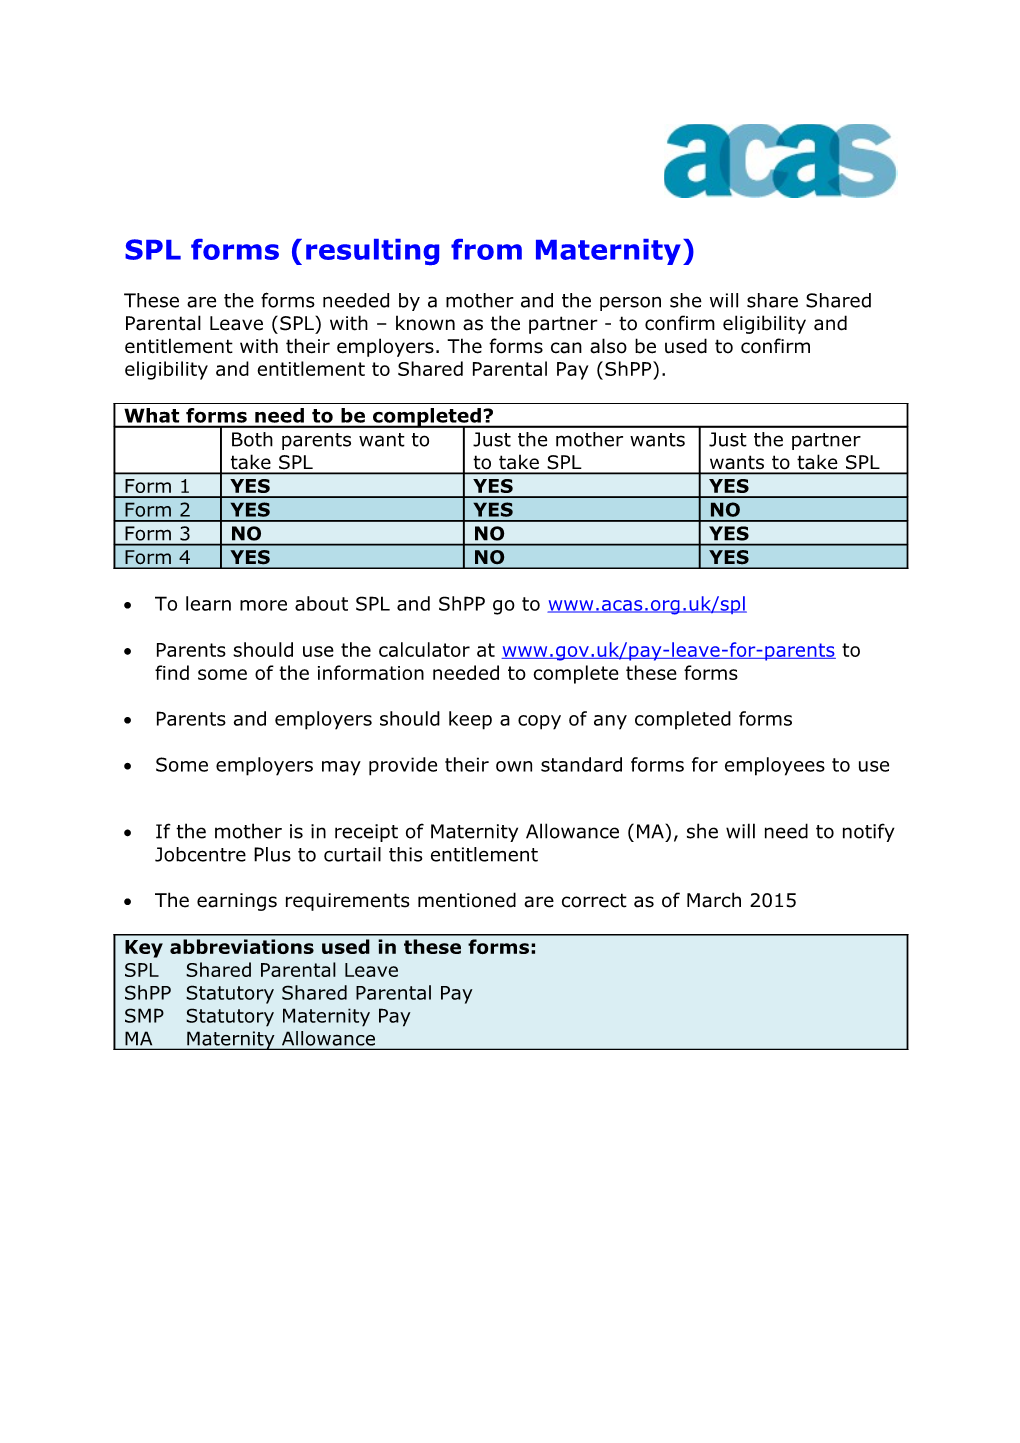 SPL Forms (Resulting from Maternity)